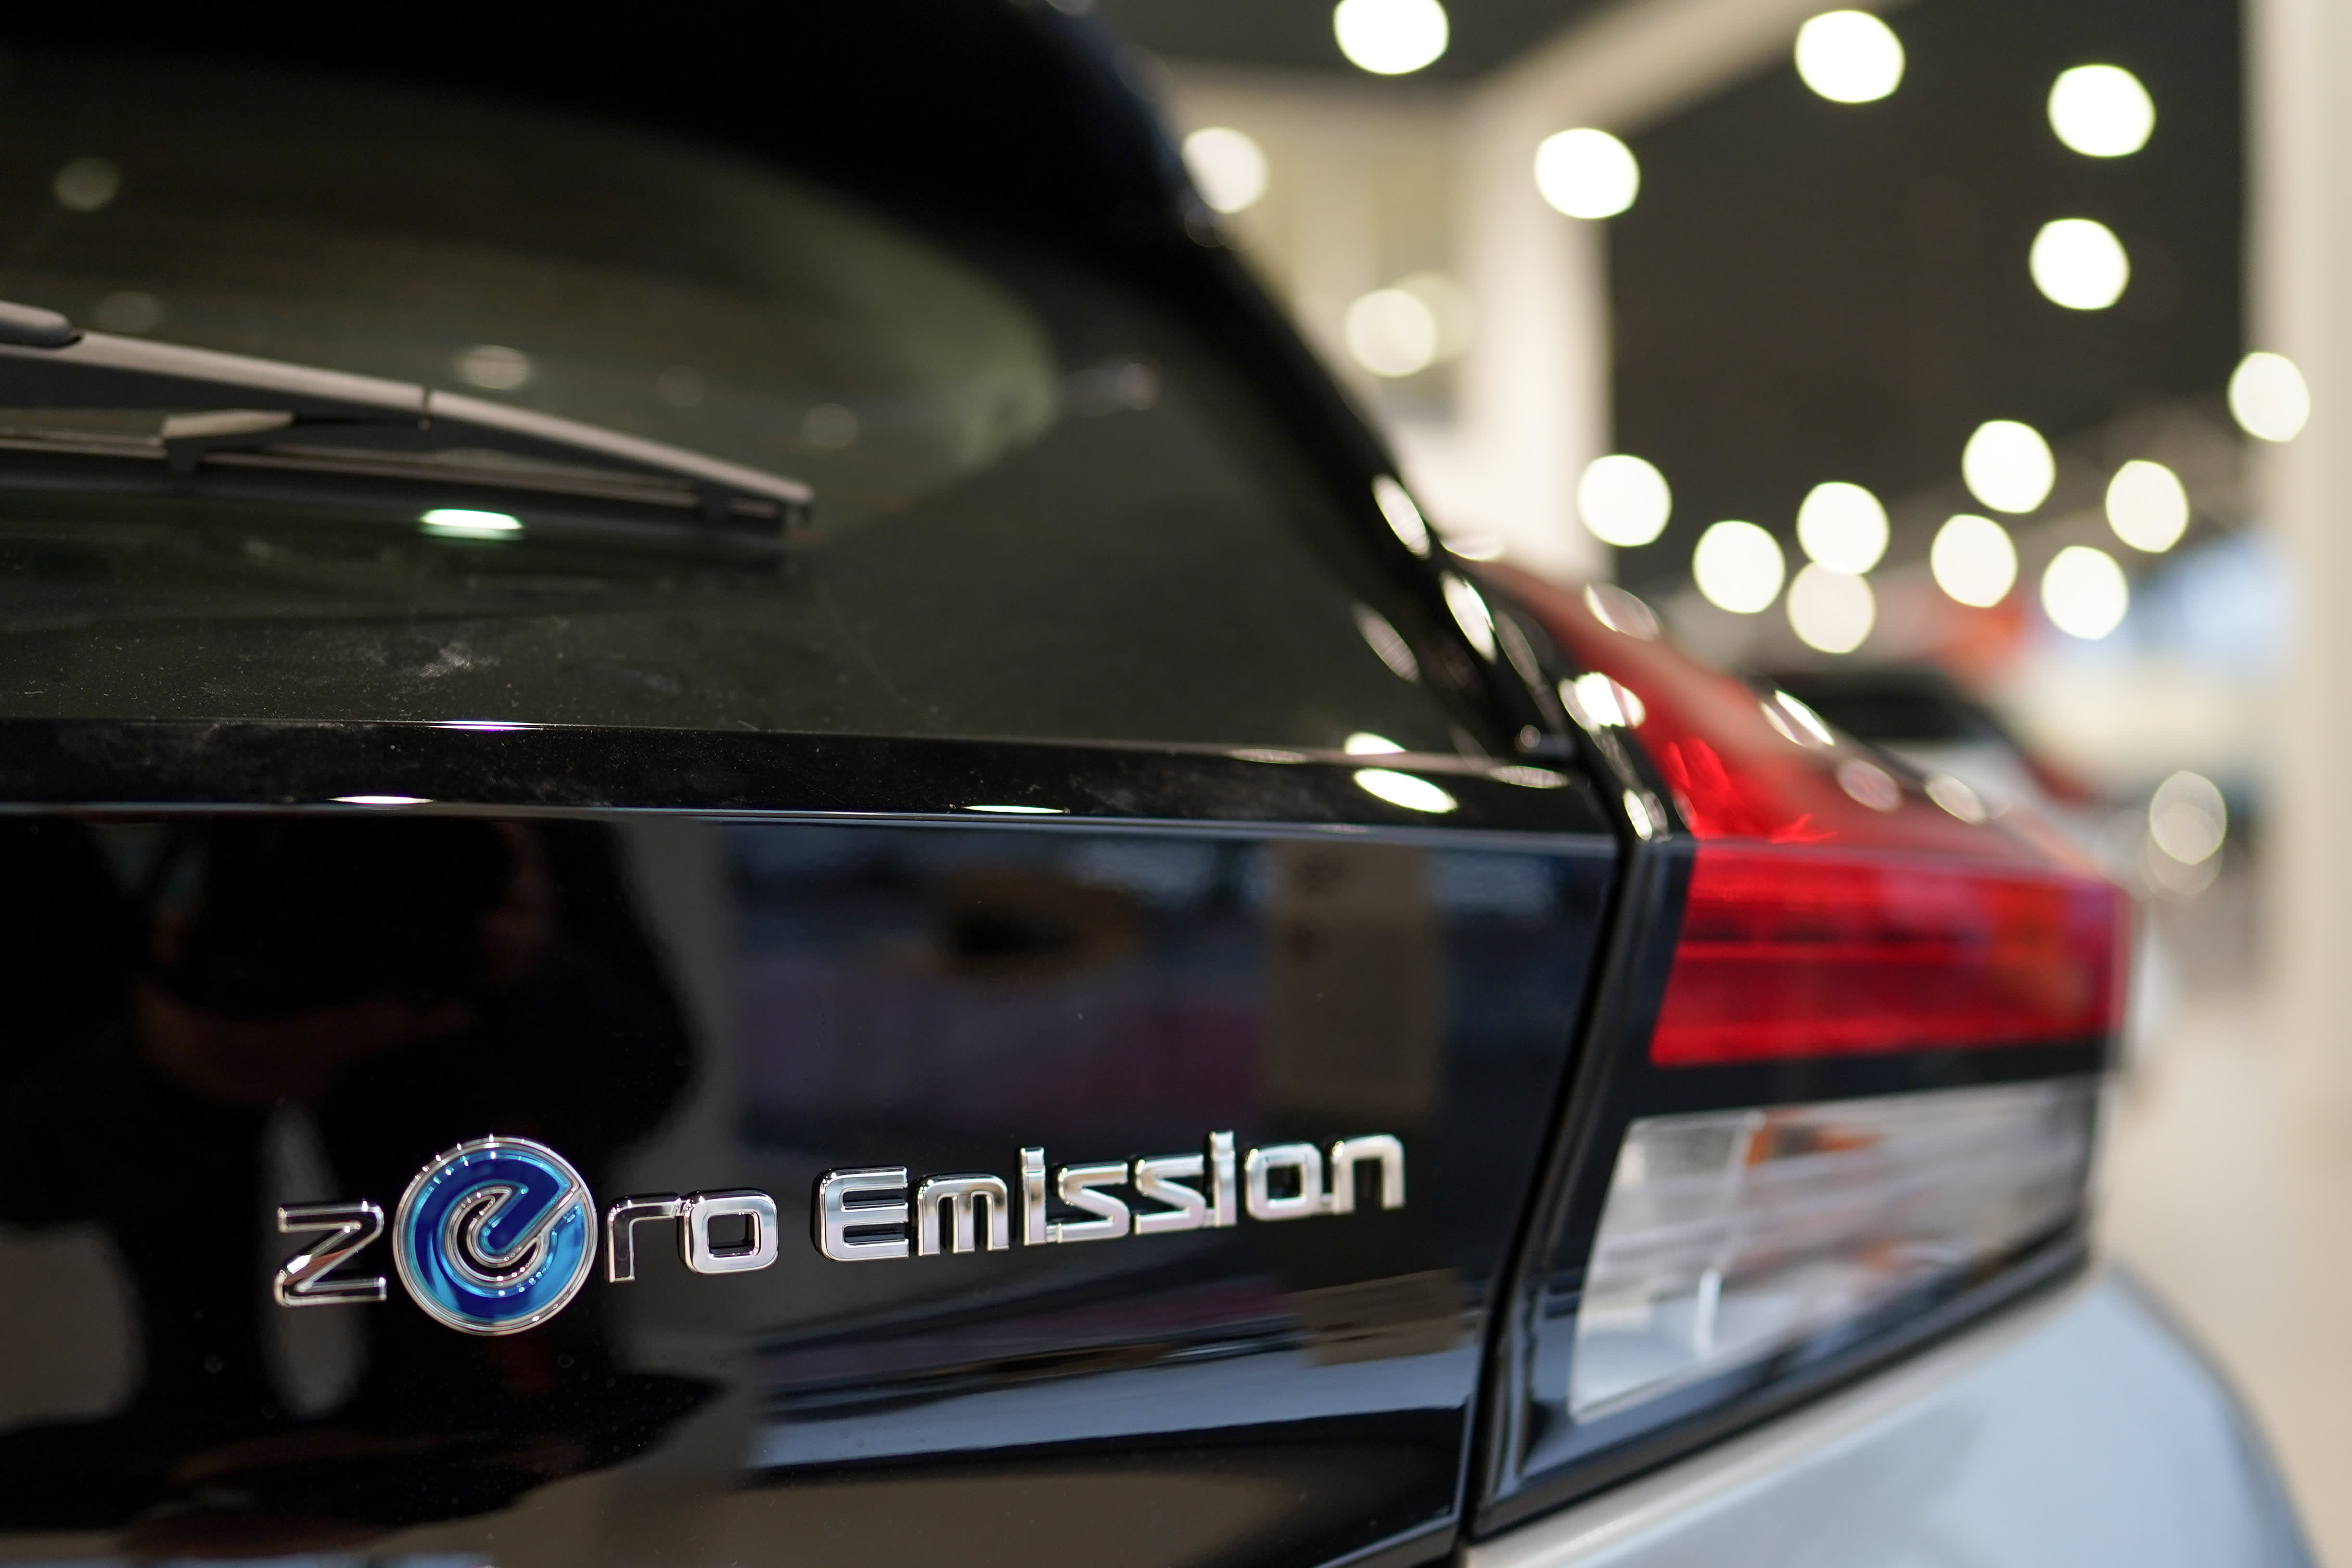 The automotive industry “has to move” on electrification, sustainability